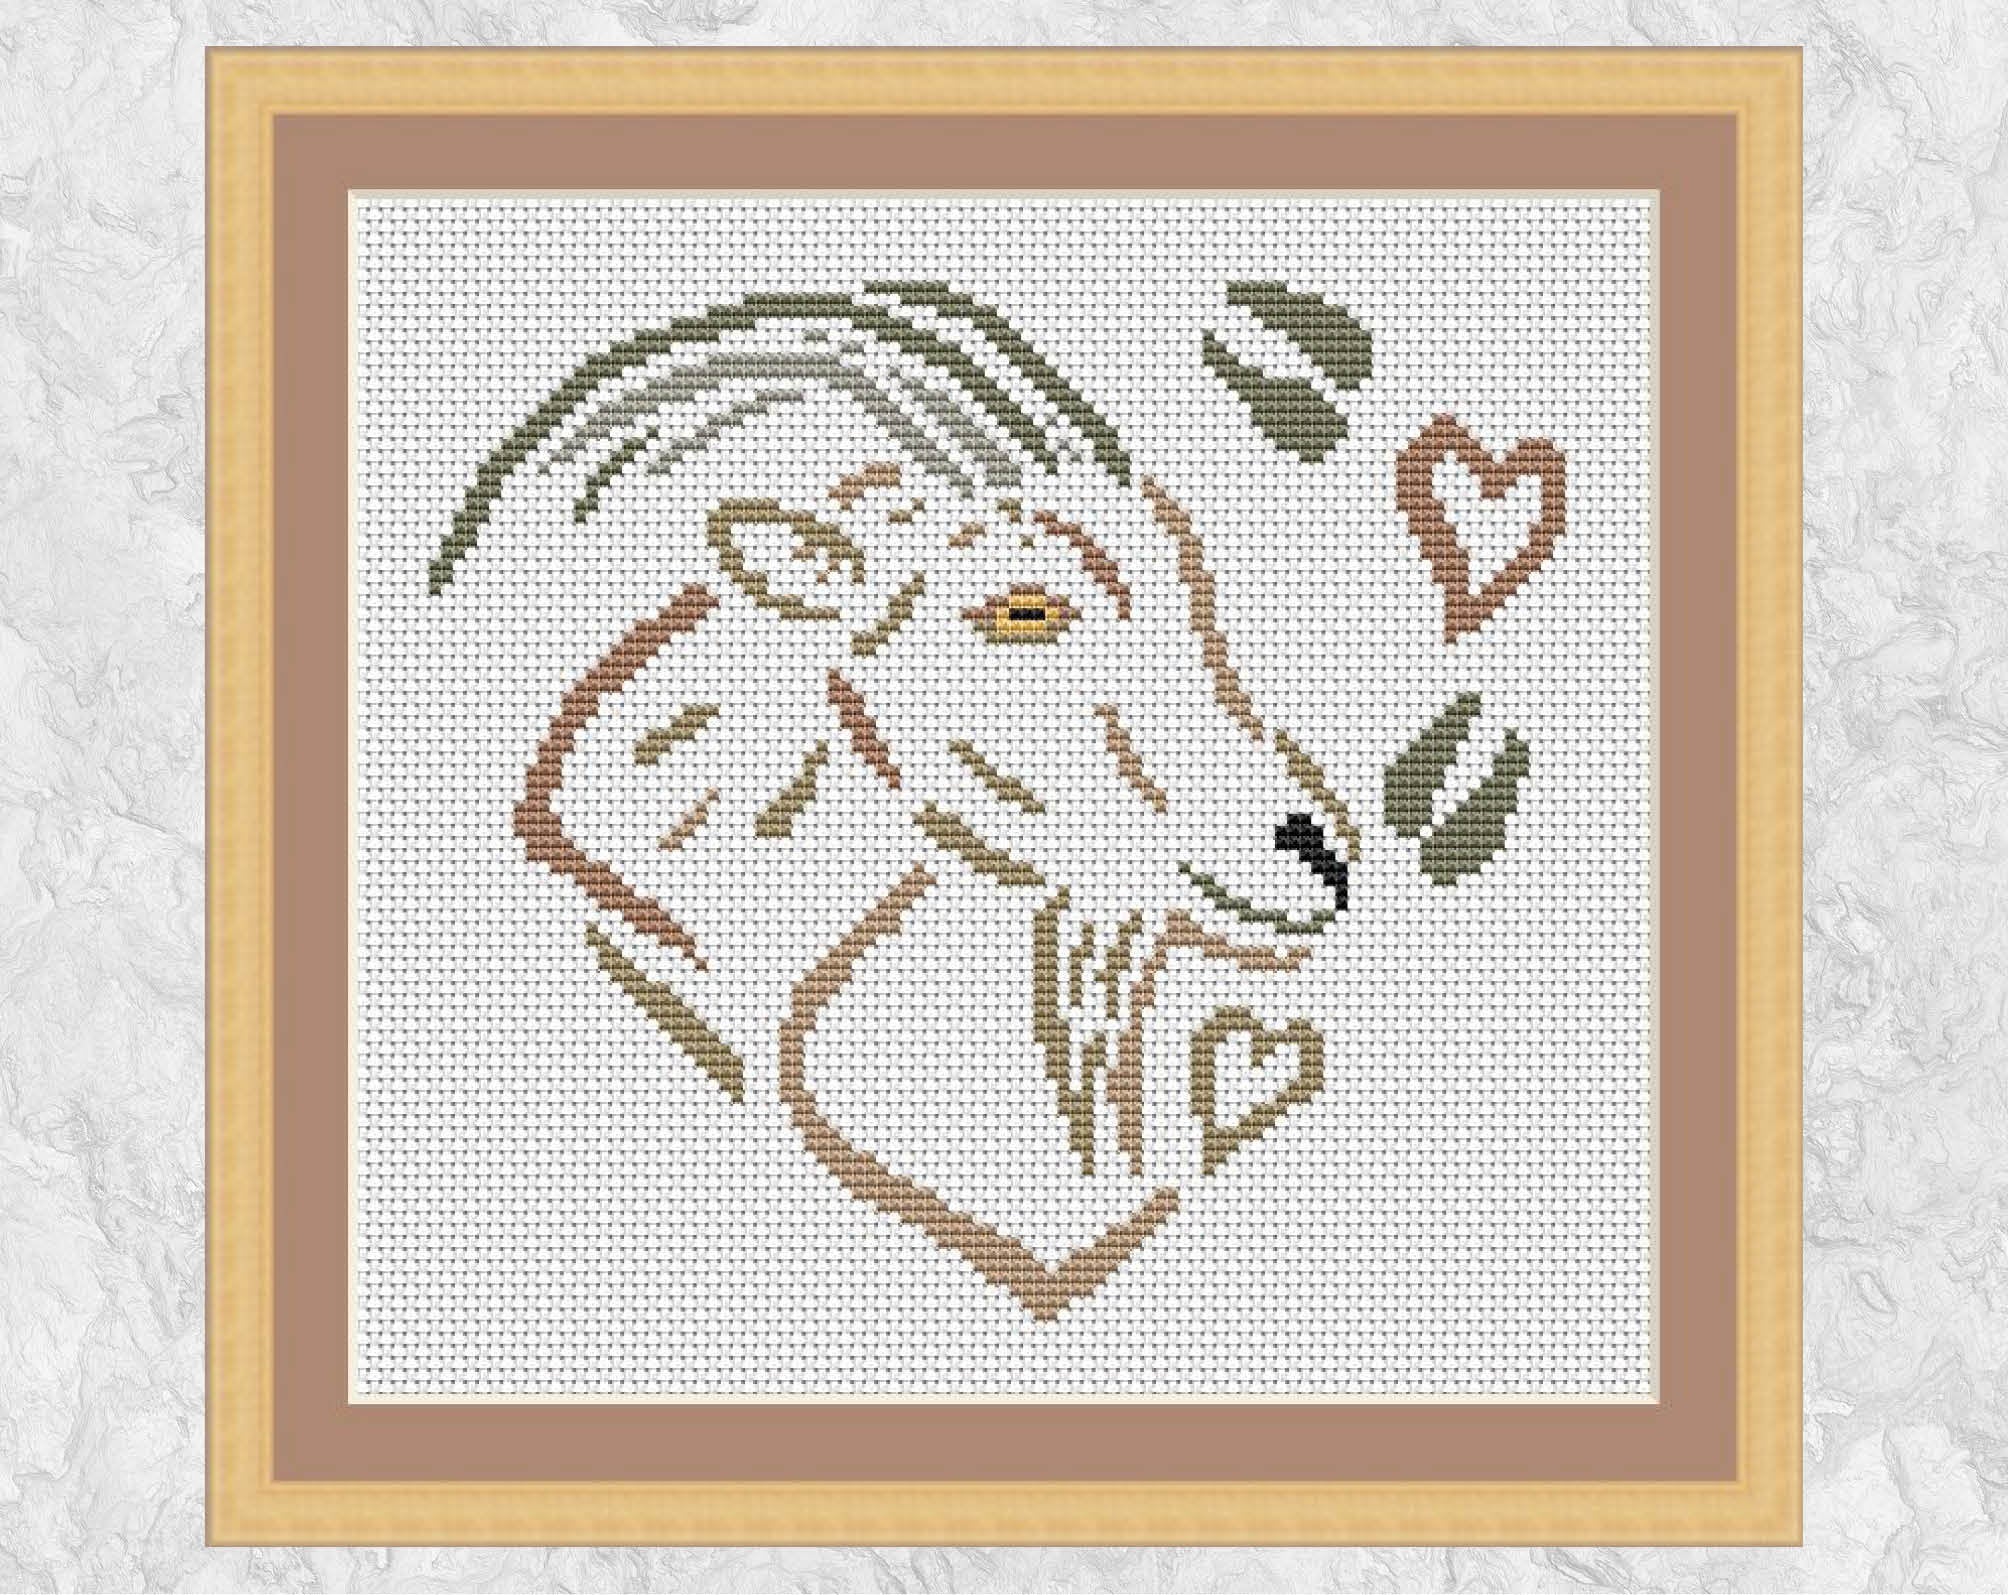 Cross stitch pattern of a goat, hearts and hoof prints, all forming a heart. Shown with frame.